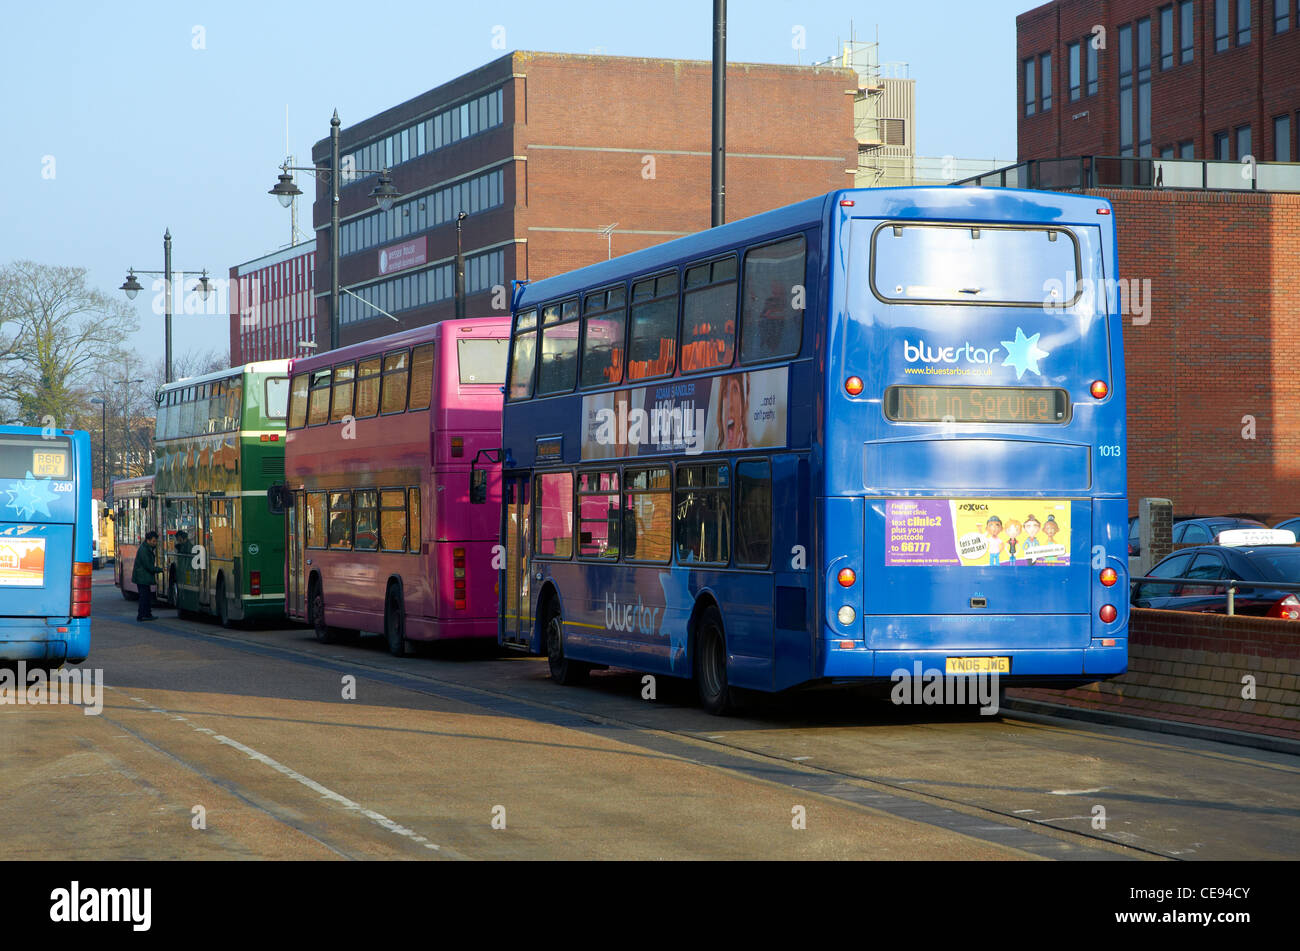 Bus station in Eastleigh, Hampshire, England with vehicles from three different bus companies. Stock Photo